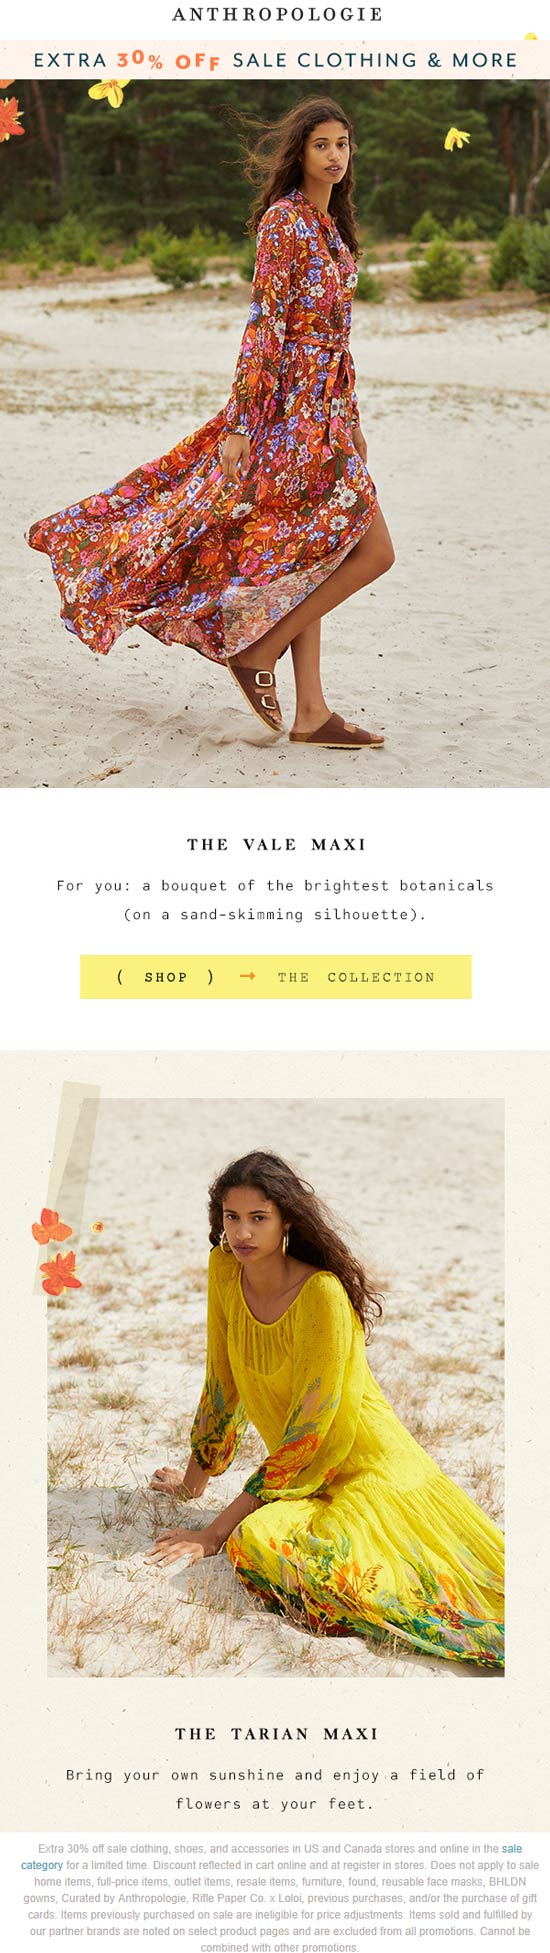 Anthropologie stores Coupon  Extra 30% off sale clothing, shoes, and accessories at Anthropologie, ditto online #anthropologie 